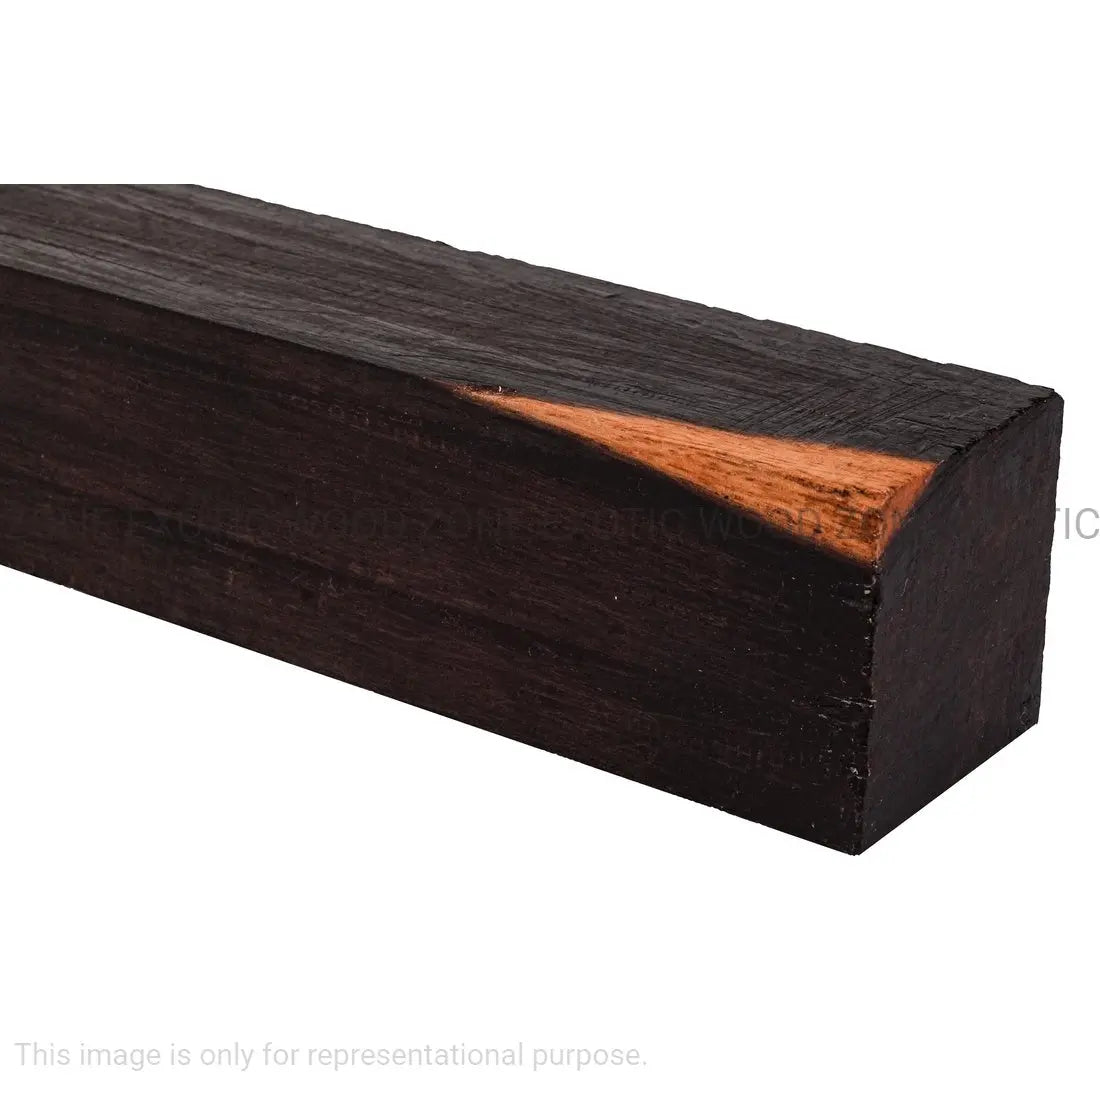 Katalox / Mexican Royal Ebony Turning Wood Blanks 1-1/2&quot; x 1-1/2&quot; x 24&quot; - Exotic Wood Zone - Buy online Across USA 